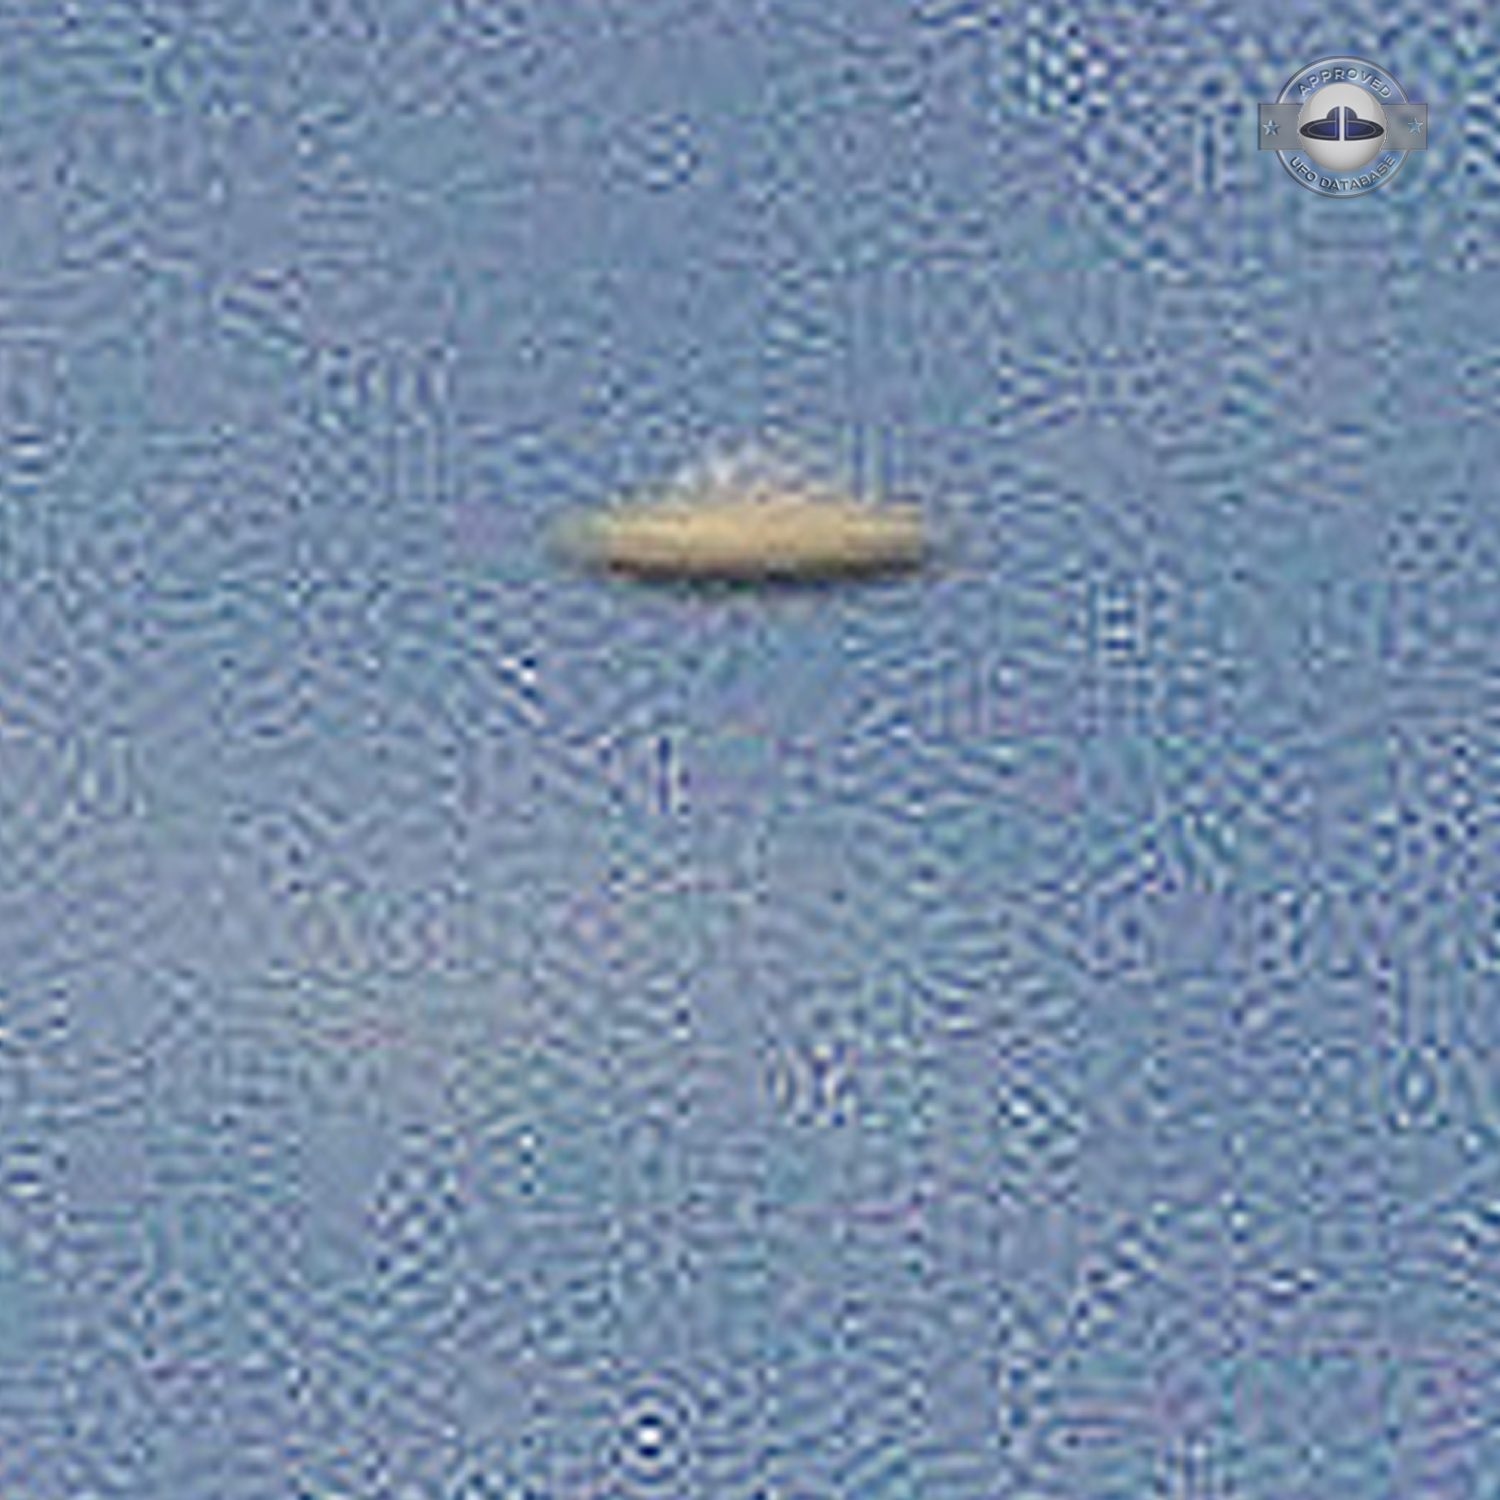 UFO picture shot in Plymouth Zoo which was located in Central Park UFO Picture #132-5